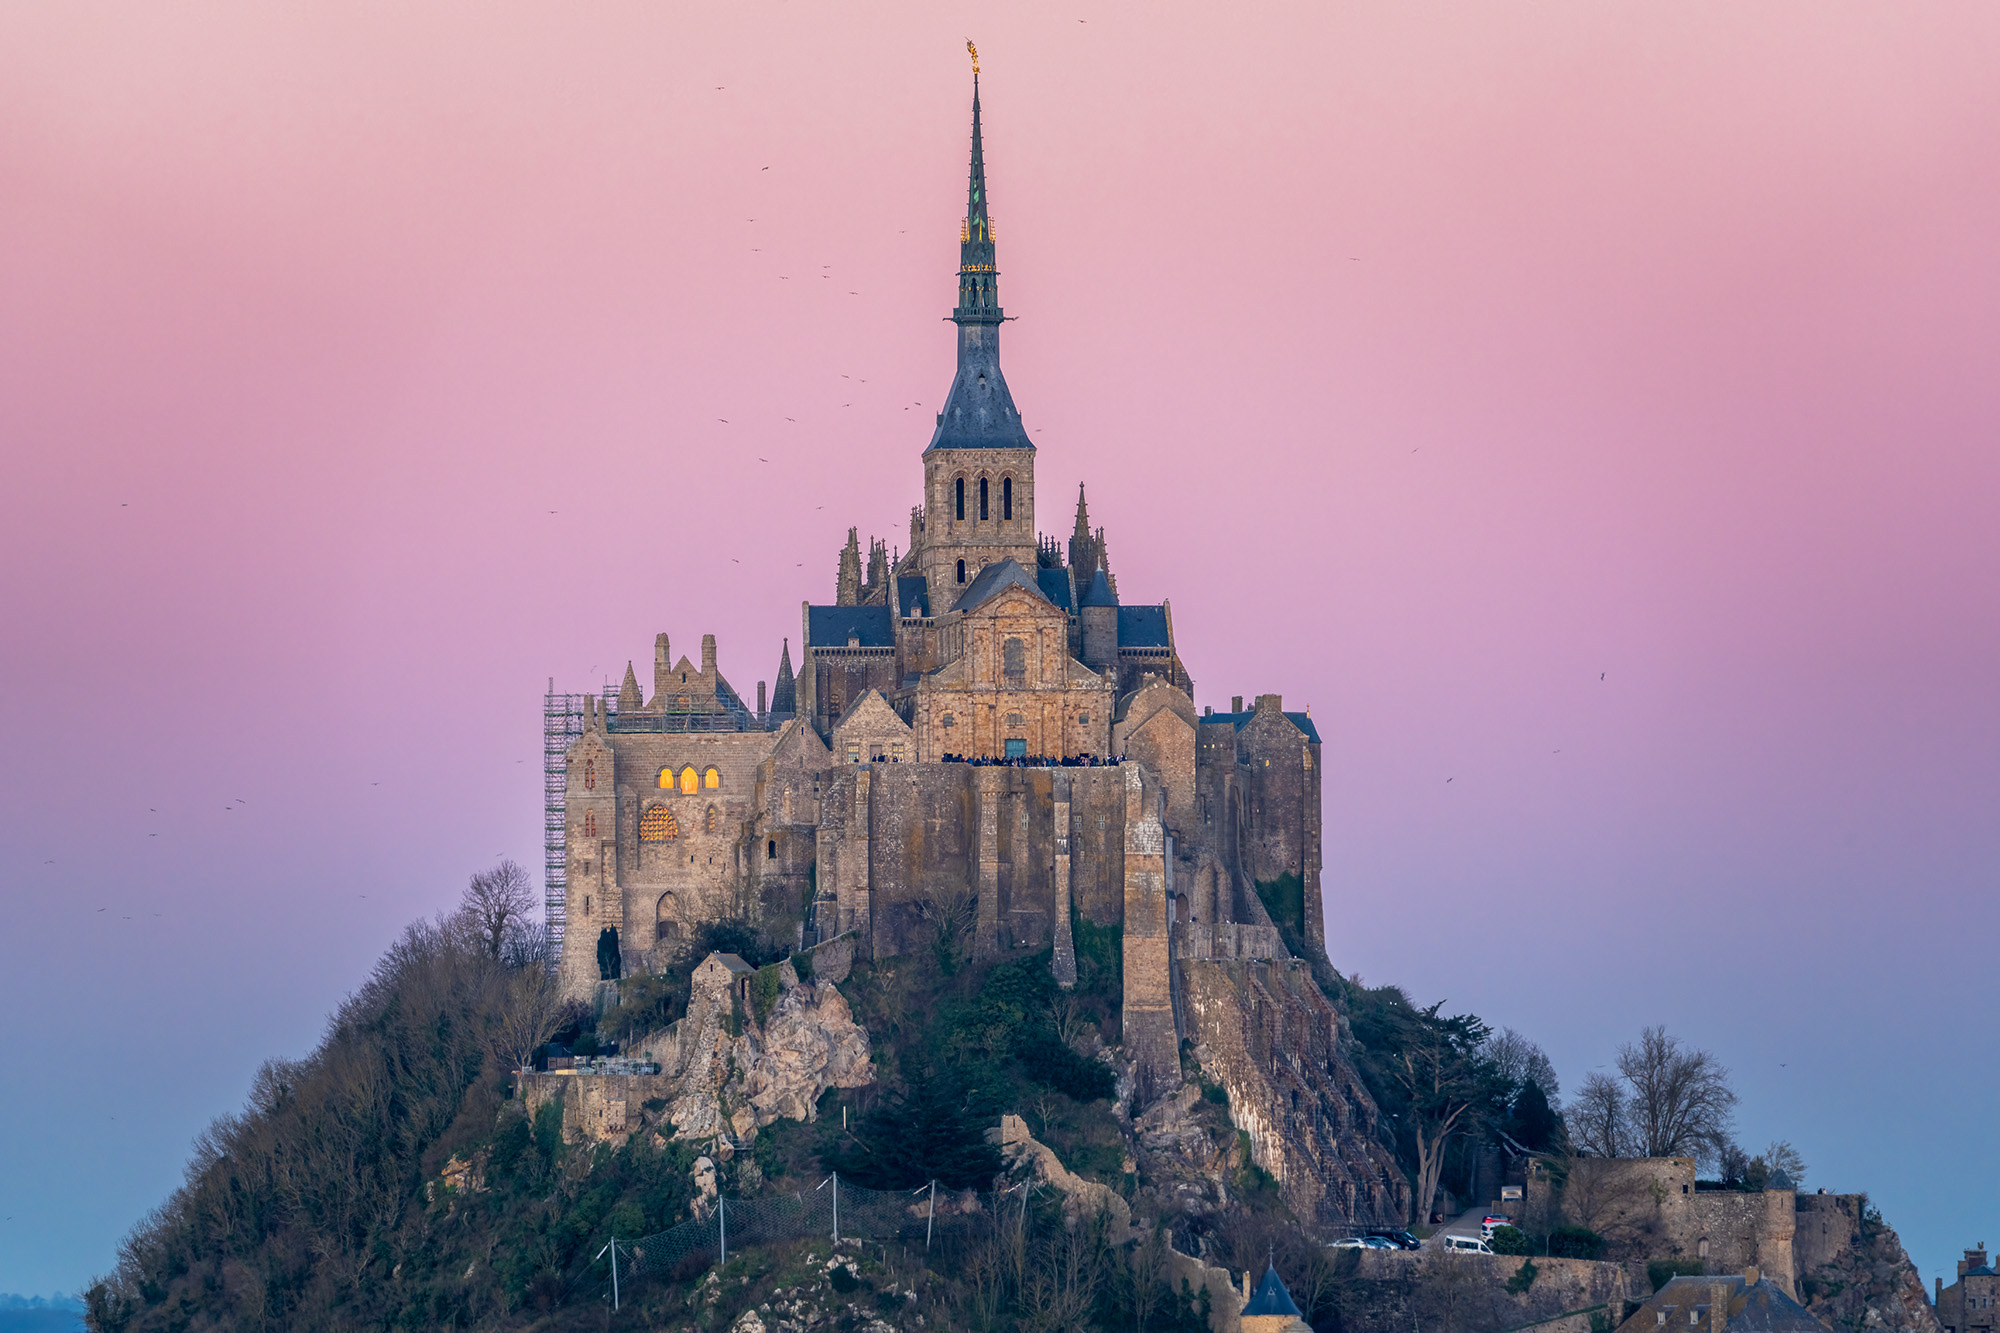 On this evening at Mont Saint Michel in Normandy, I witnessed a memorable "earth shadow" stretching across the horizon. With...